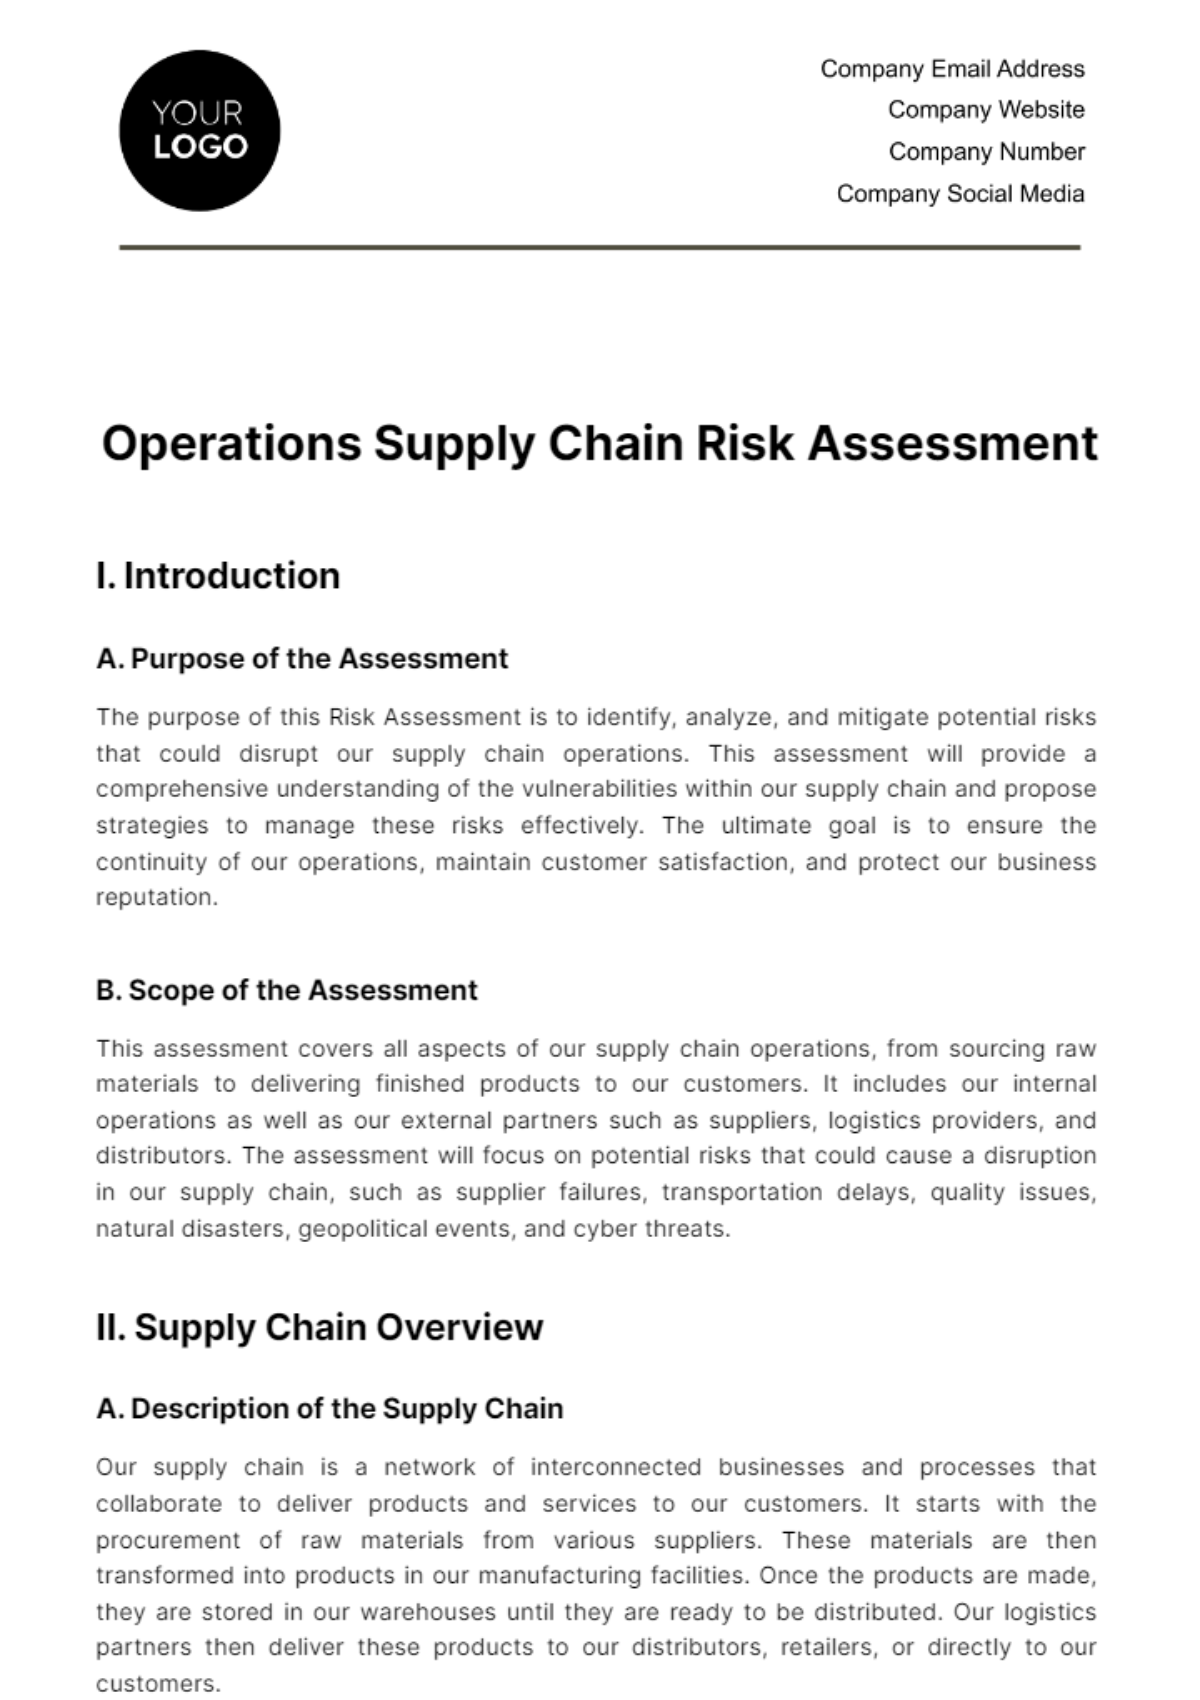 Operations Supply Chain Risk Assessment Template